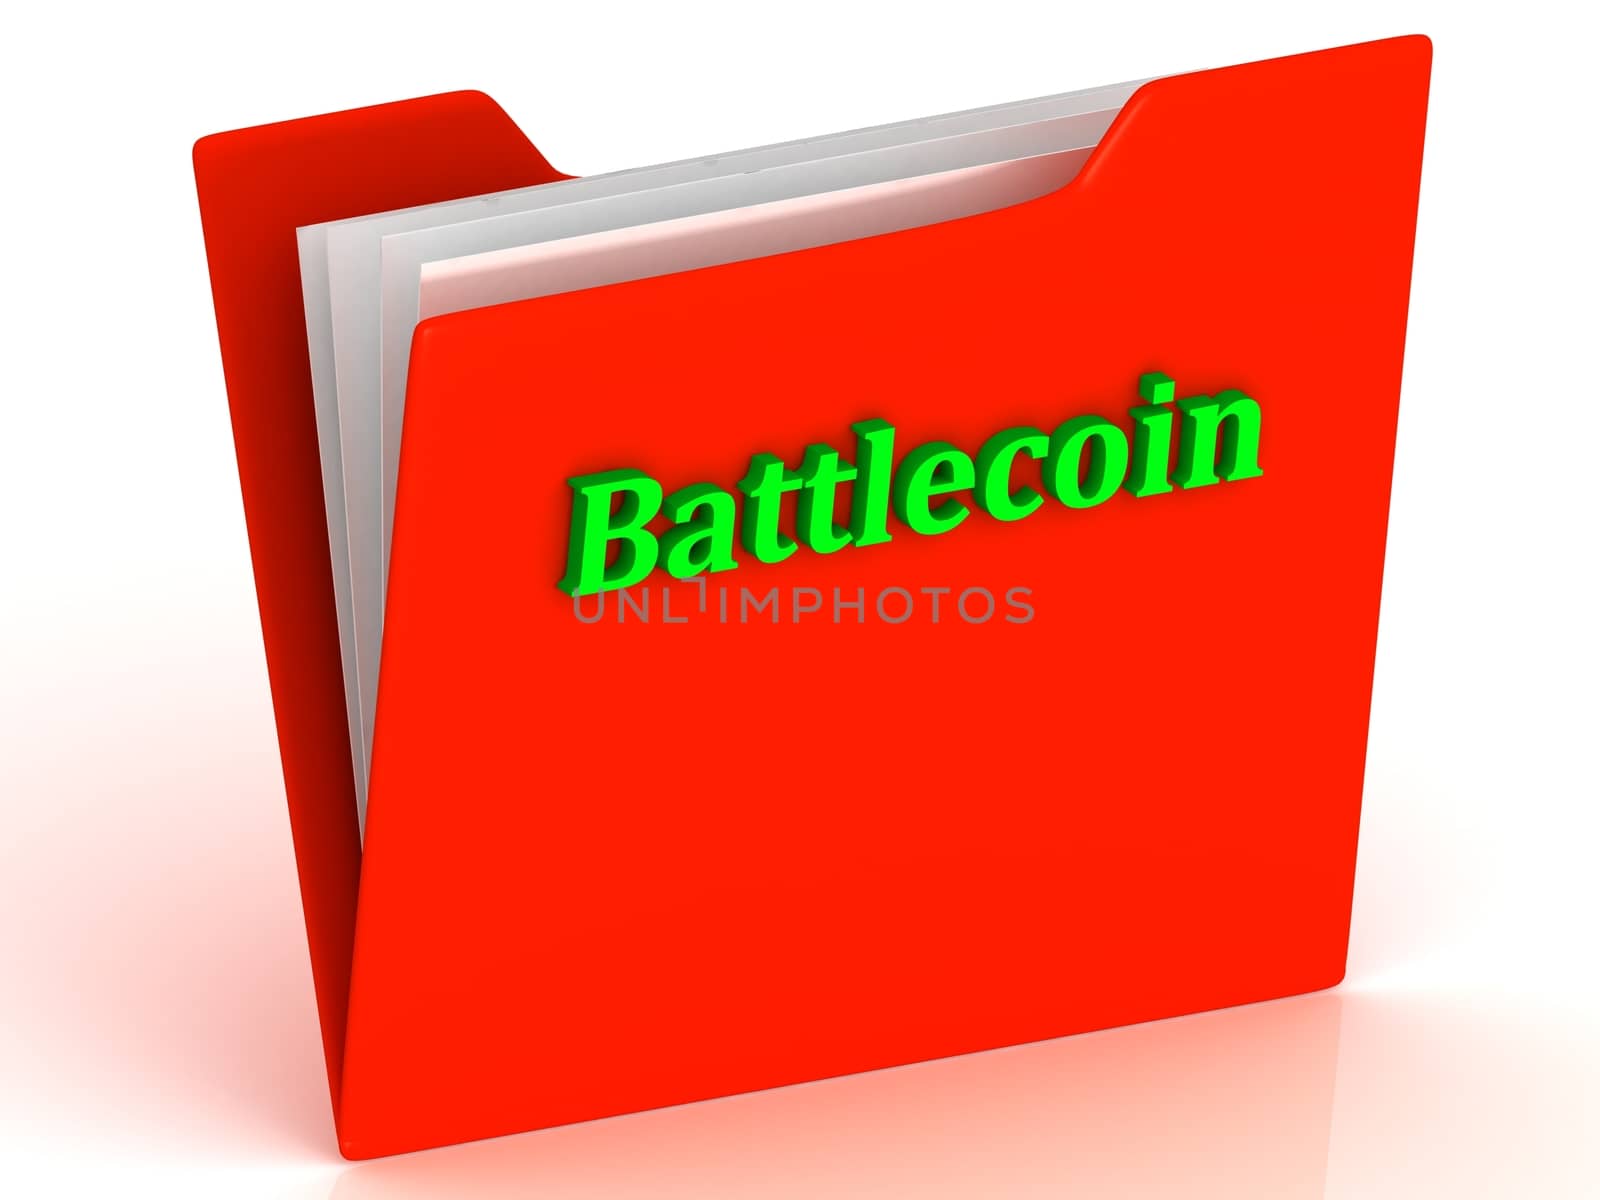 Battlecoin- bright green letters on a gold folder on a white background